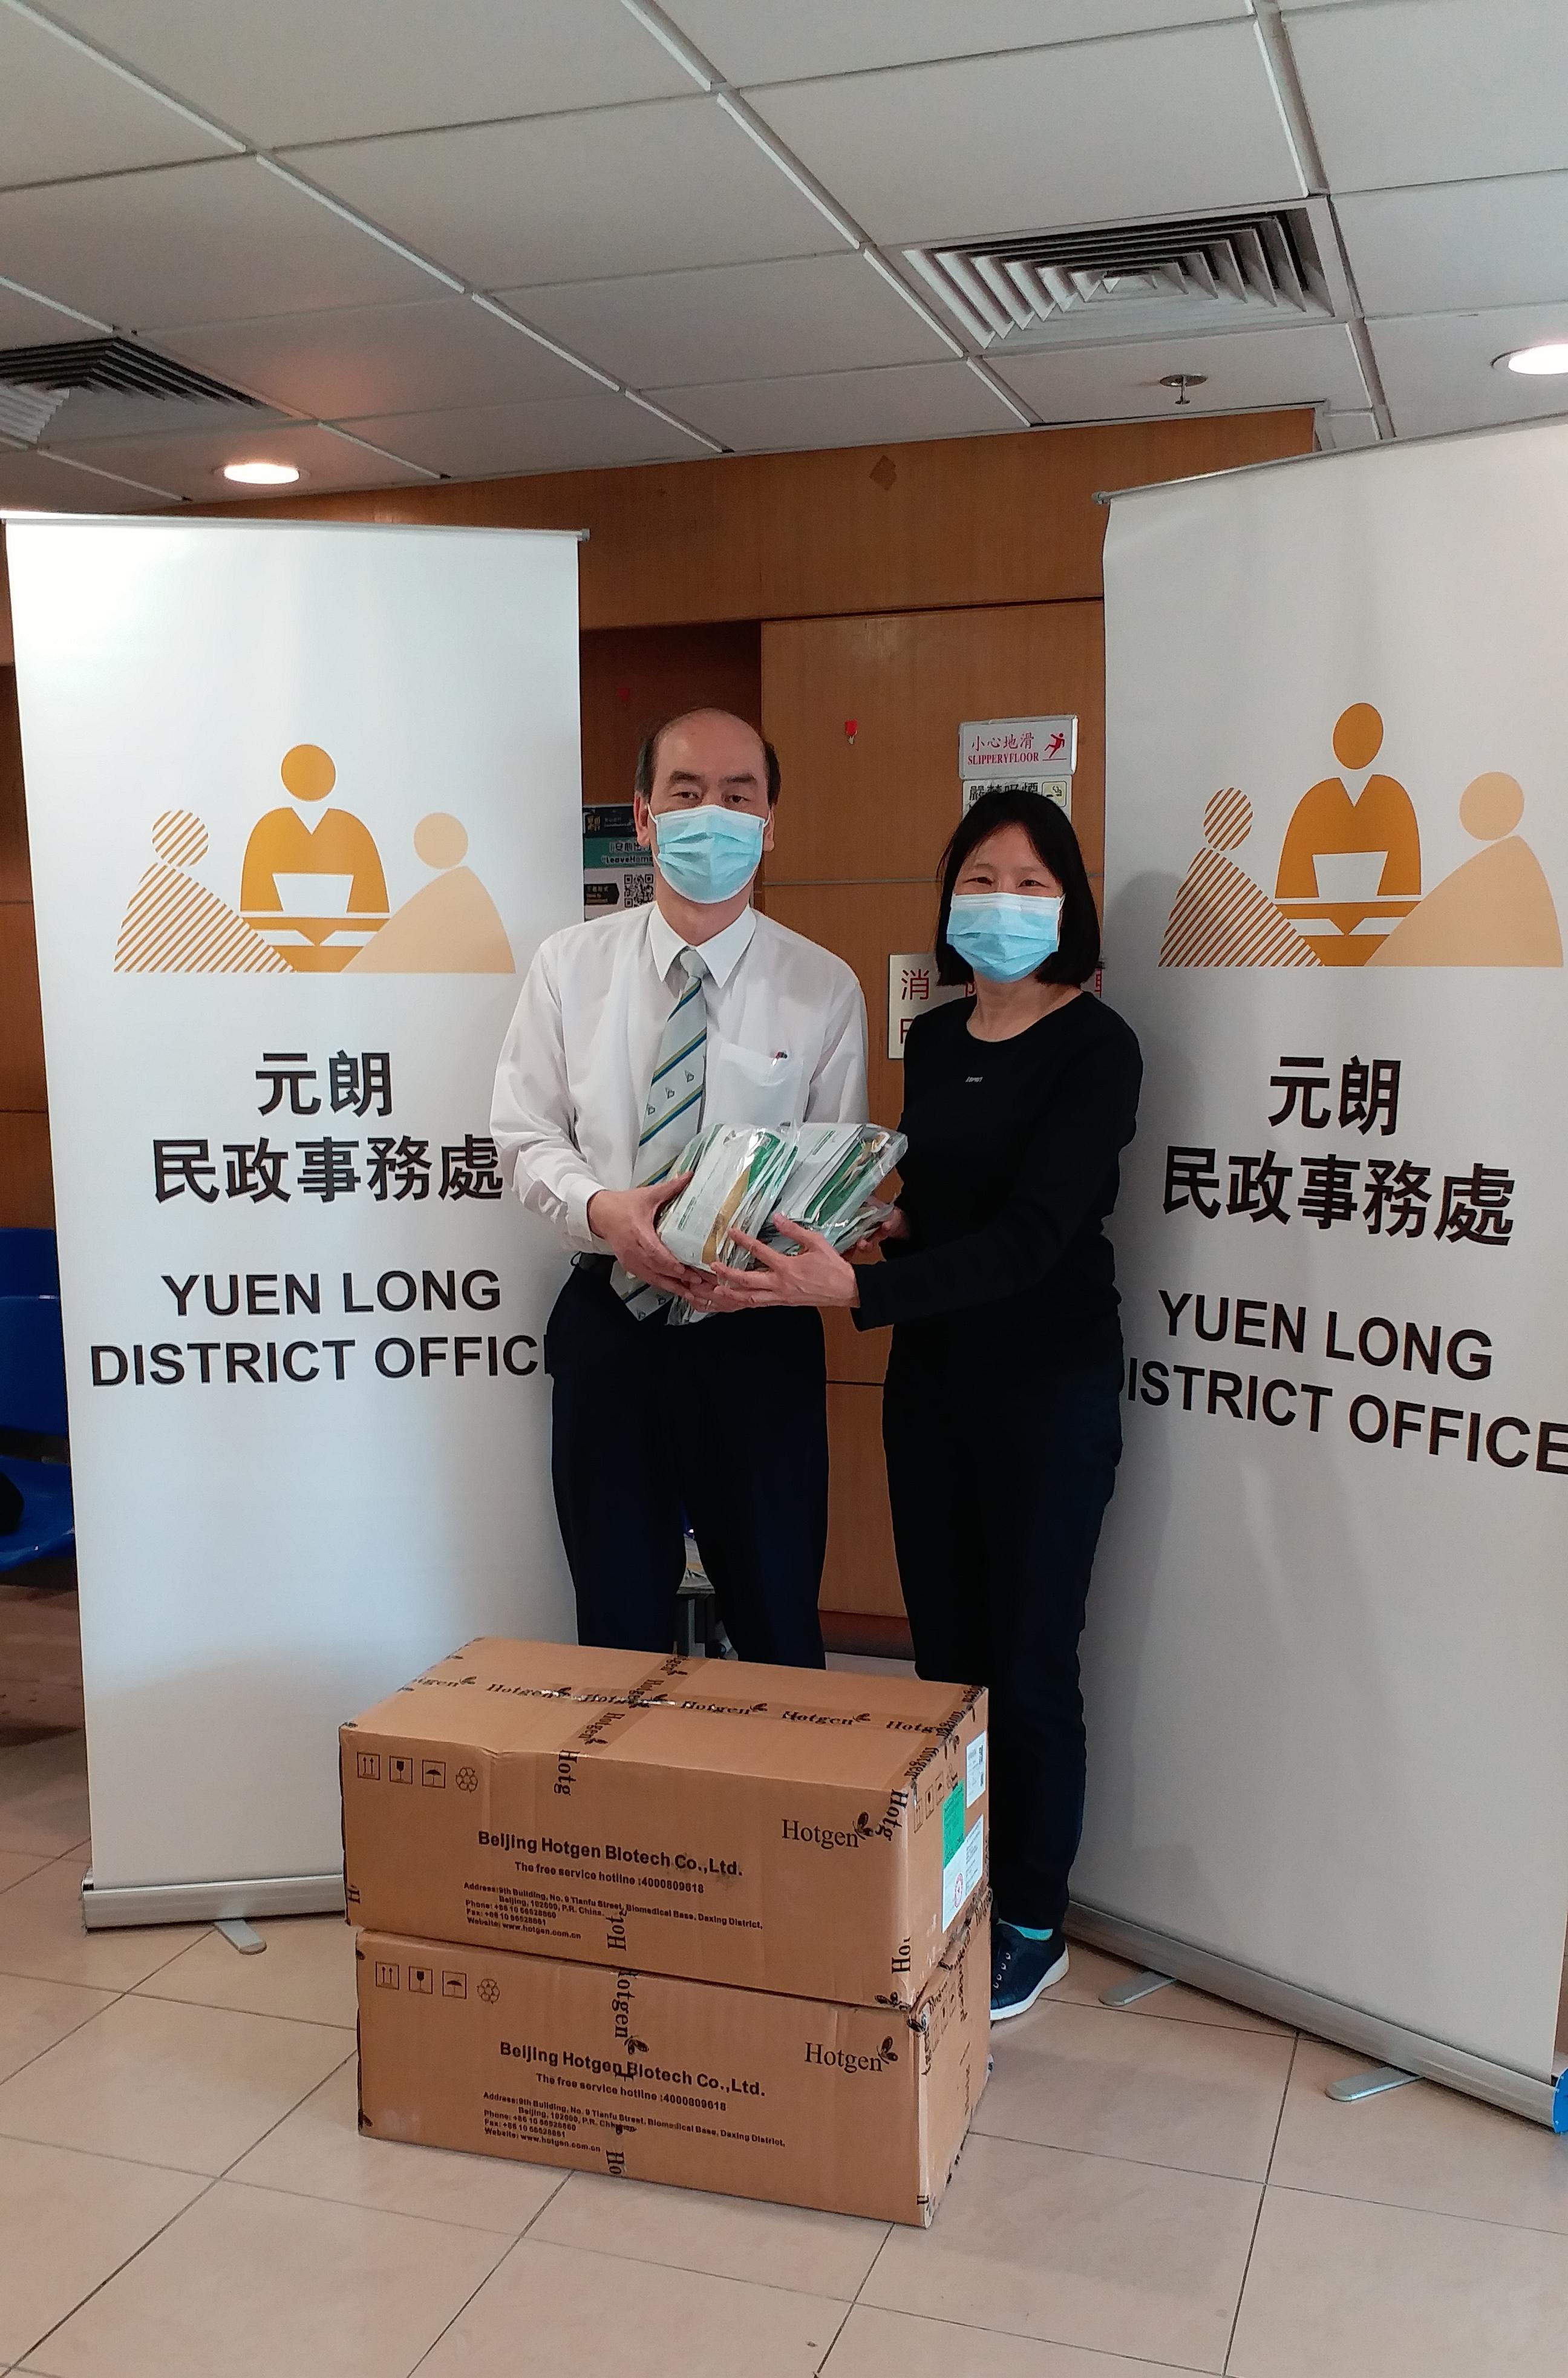 The Yuen Long District Office today (March 11) distributed COVID-19 rapid test kits to households, cleansing workers and property management staff living and working in Tin Fu Court for voluntary testing through the property management company.